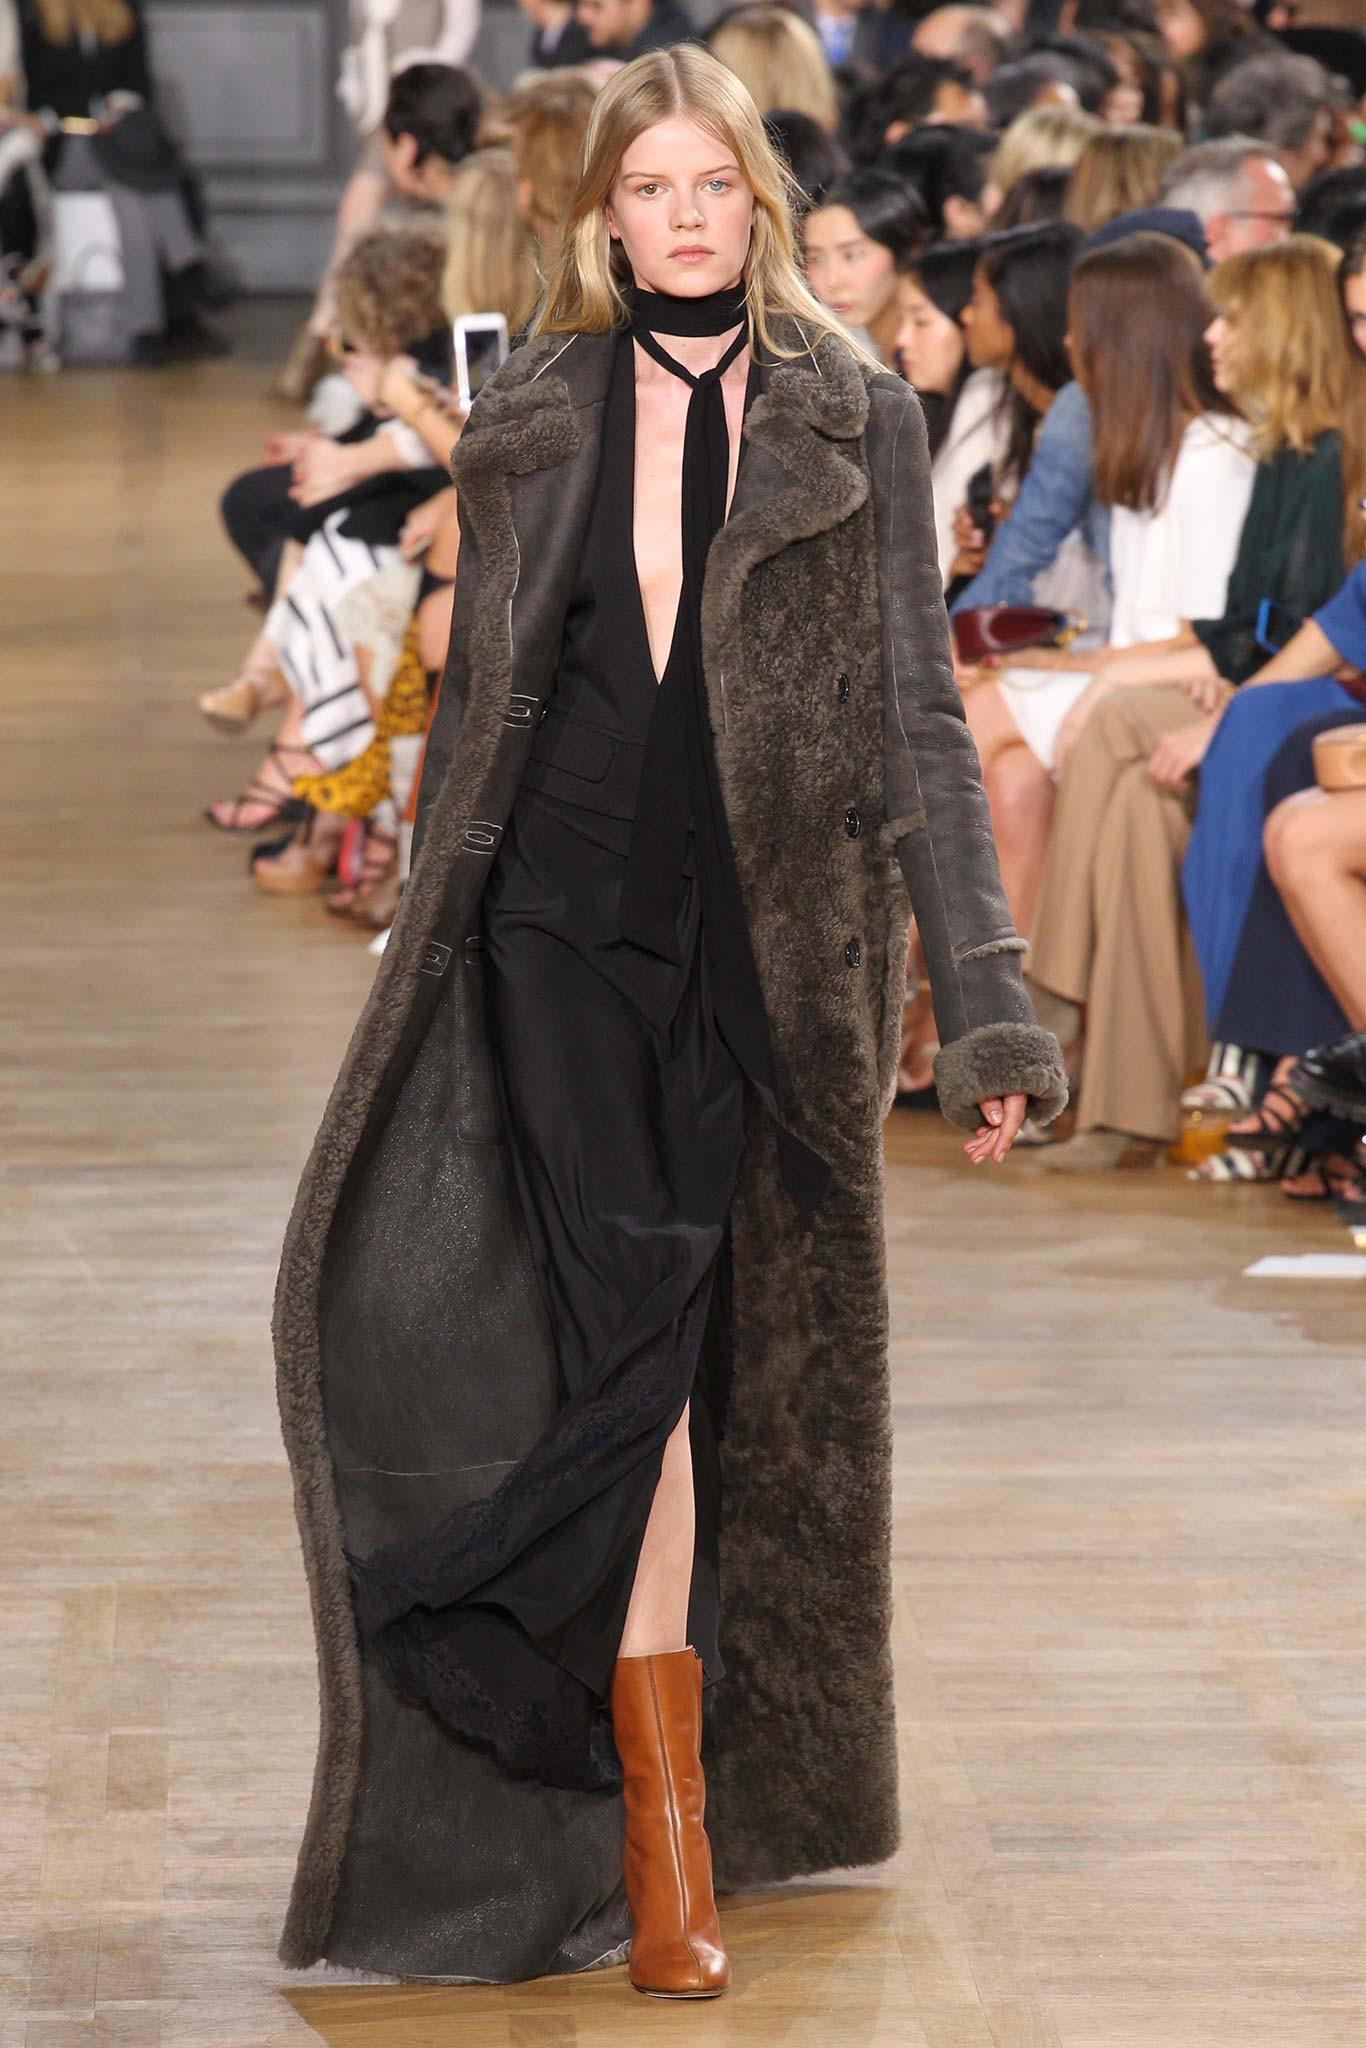  Beautiful reversible shearling coat by Chloé from their Fall Winter 2015 collection. A longer version of this coat was presented on the runway.

The most perfect winter coat that will certainly keep you warm in the cold winter months, the most